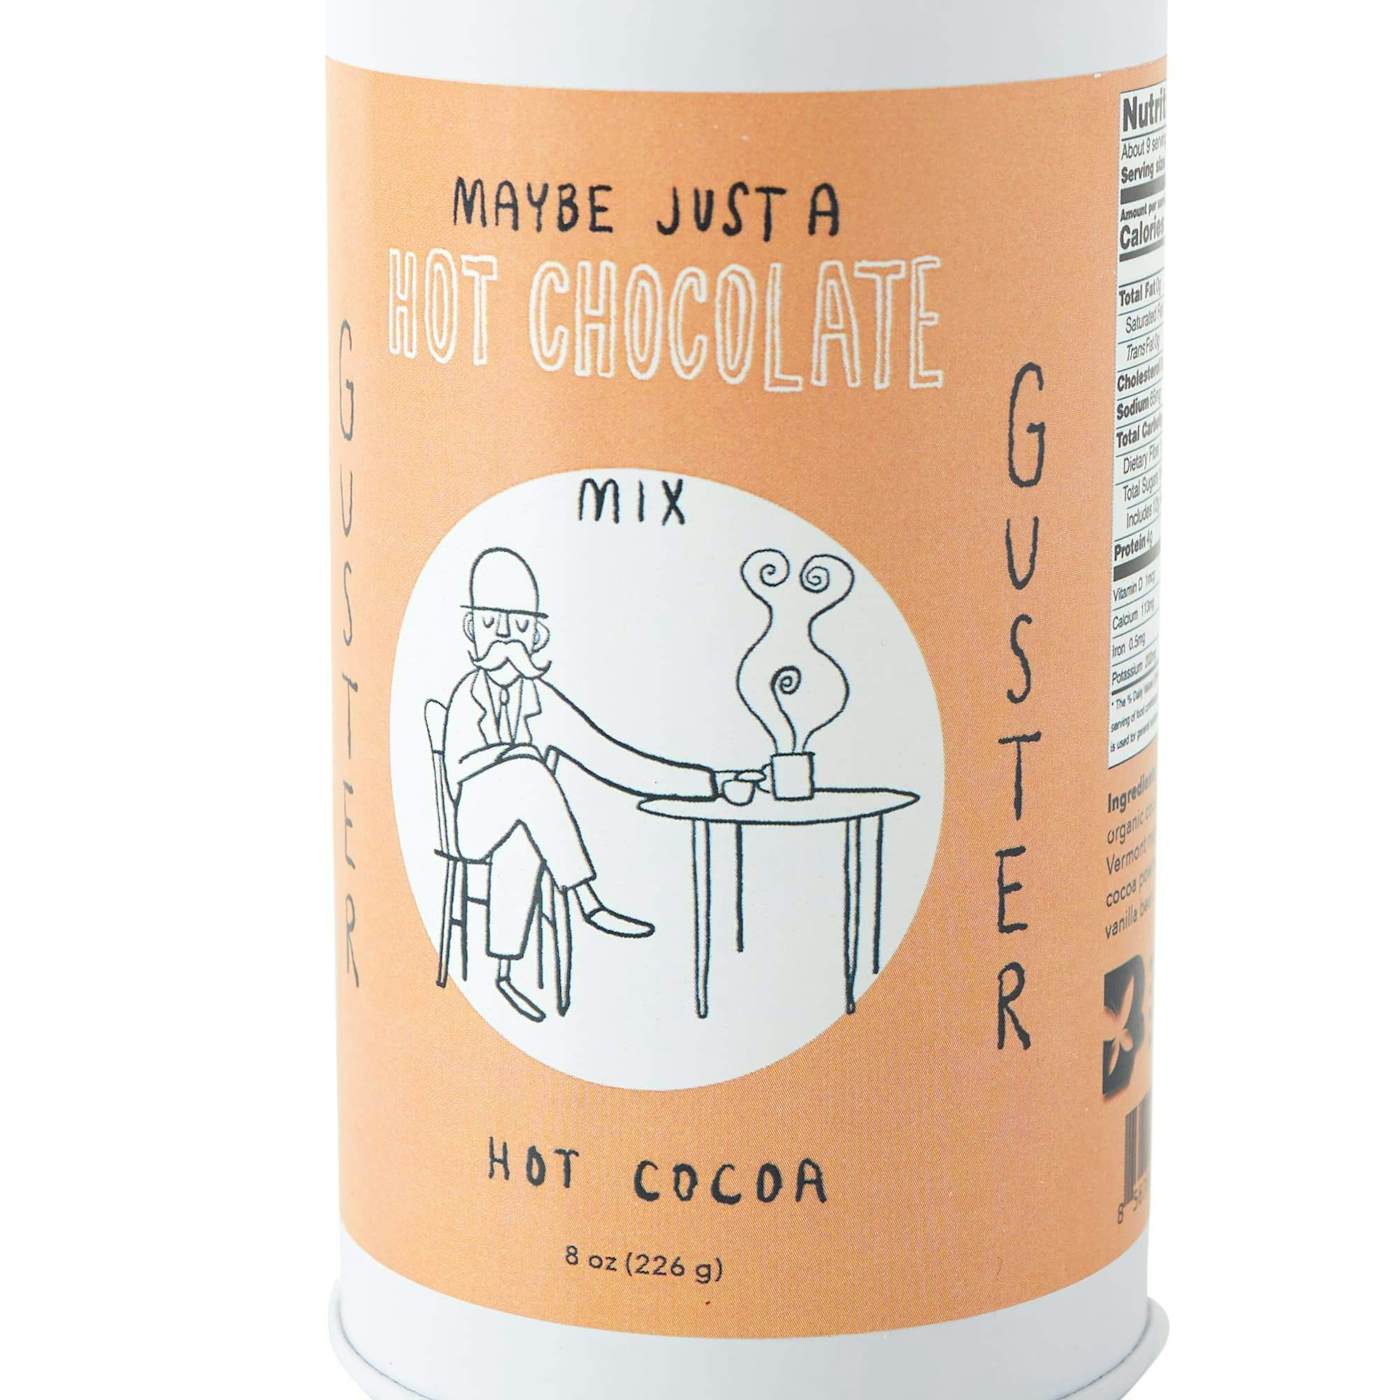 'Maybe Just A Hot Chocolate' Guster Hot Chocolate Mix